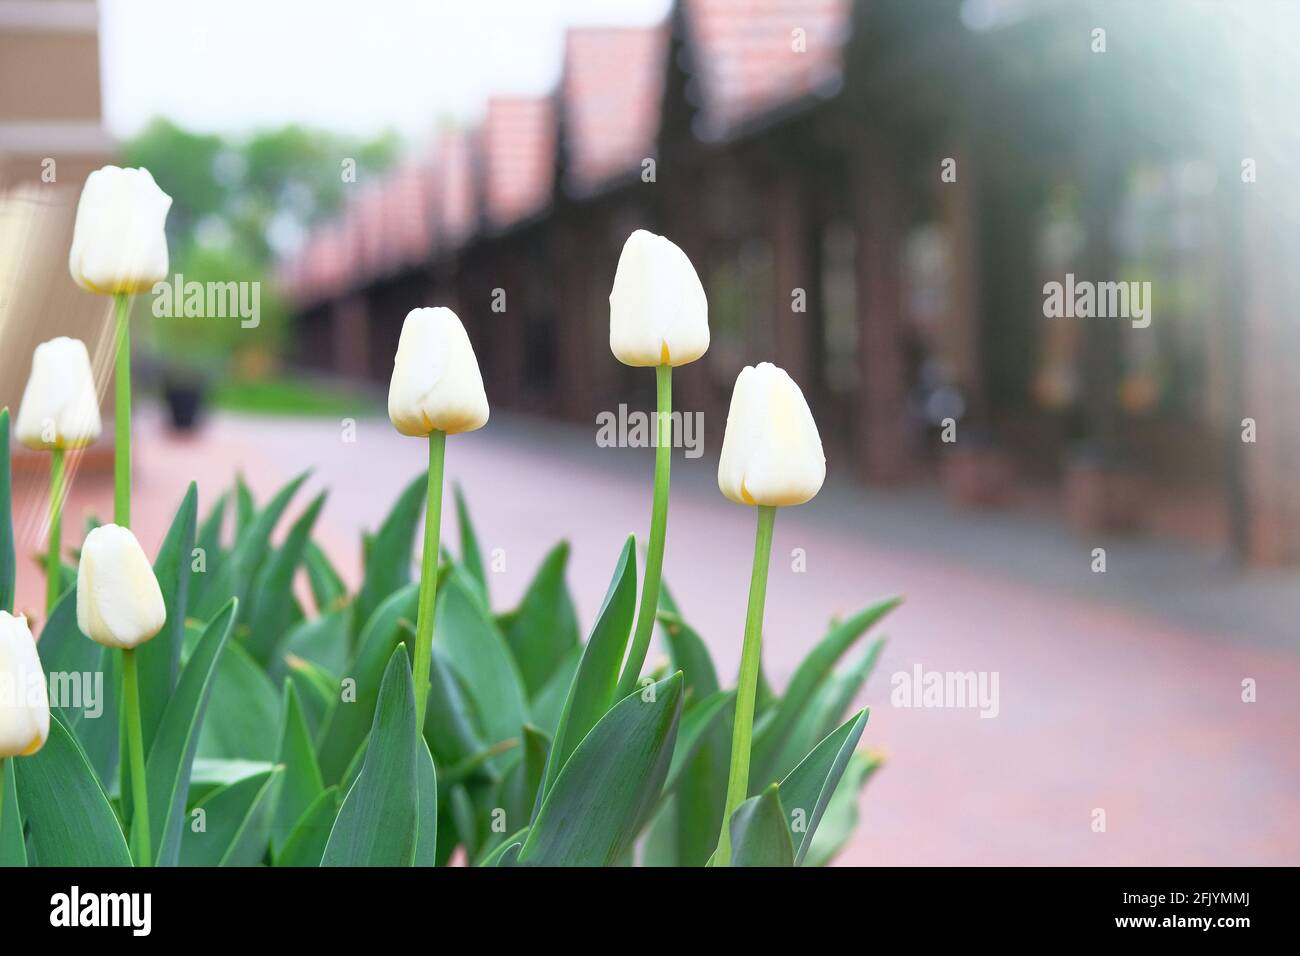 Spring flowers. Tulips with white petals is blooming in city. Romantic background of nature. Landscaping and decoration in spring season. Stock Photo